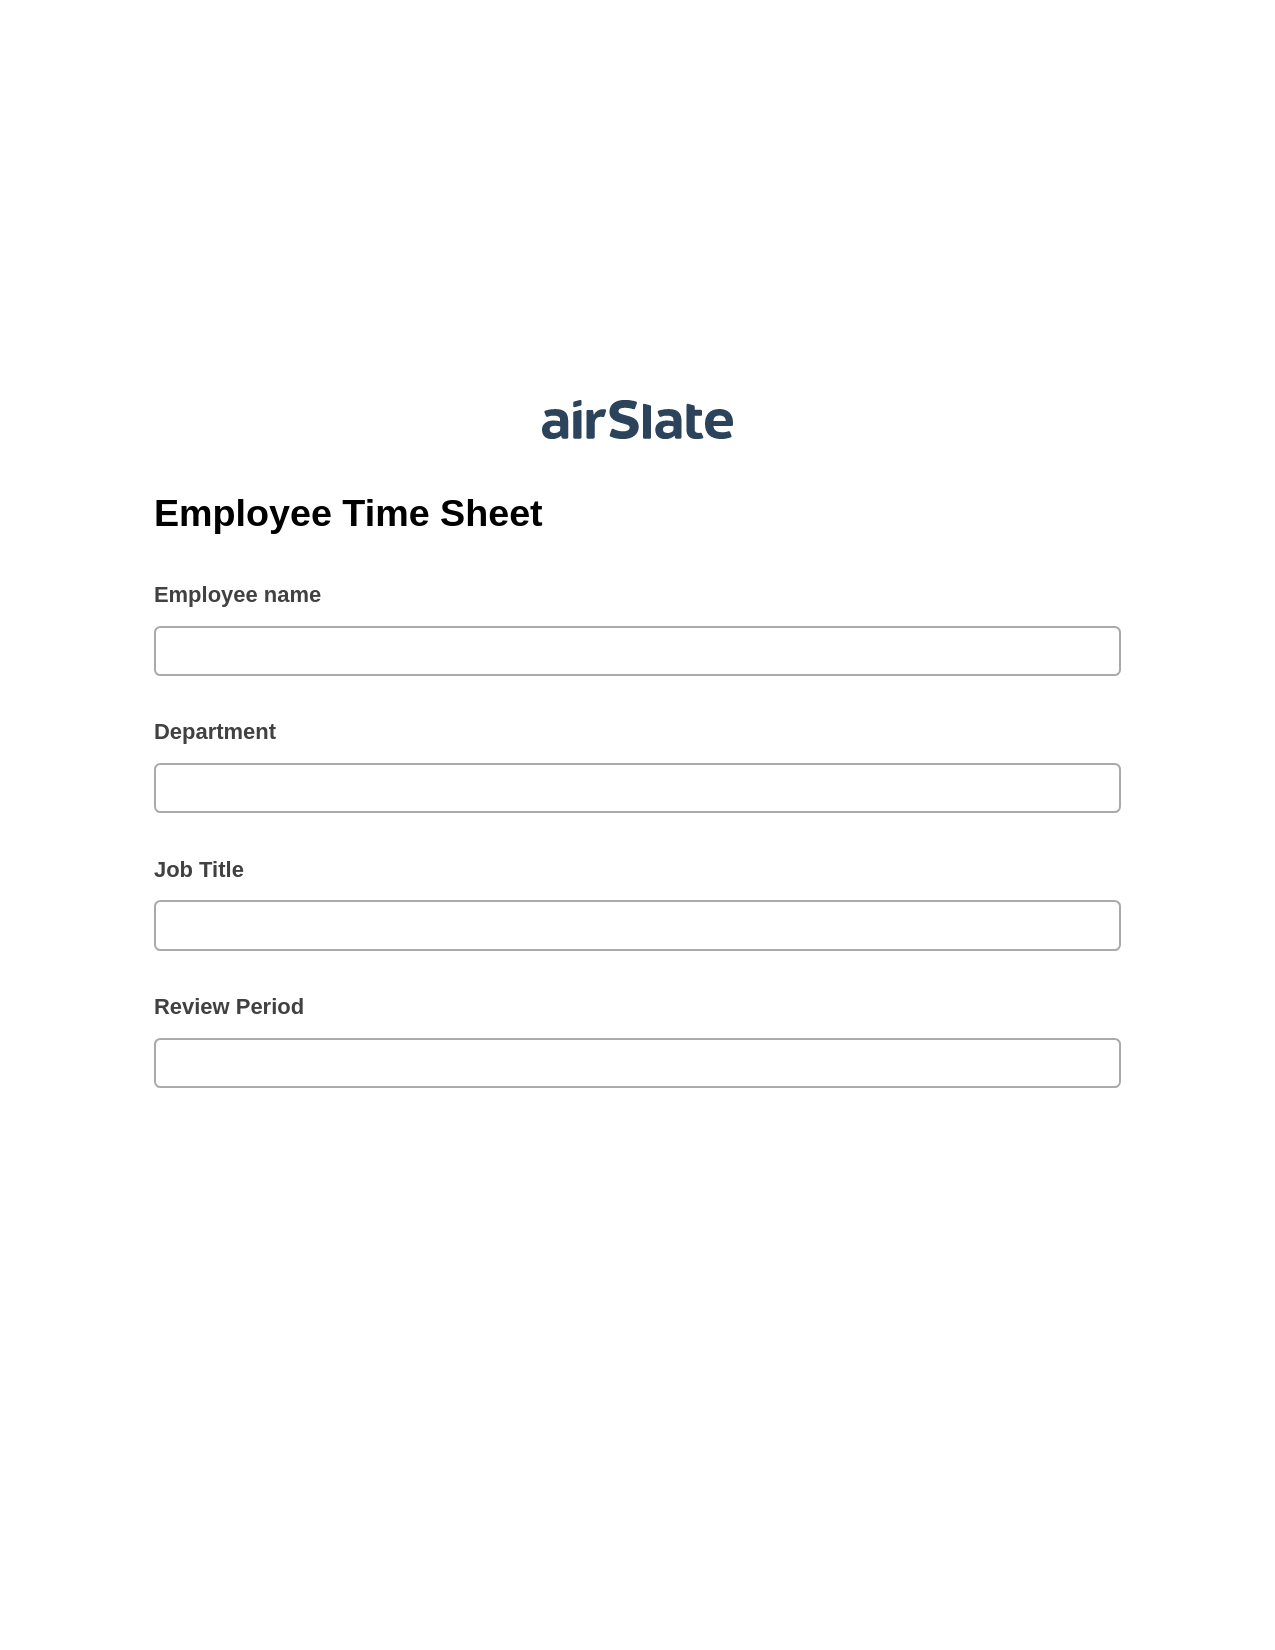 Employee Time Sheet Pre-fill from Salesforce Records with SOQL Bot, Google Cloud Print Bot, Archive to SharePoint Folder Bot